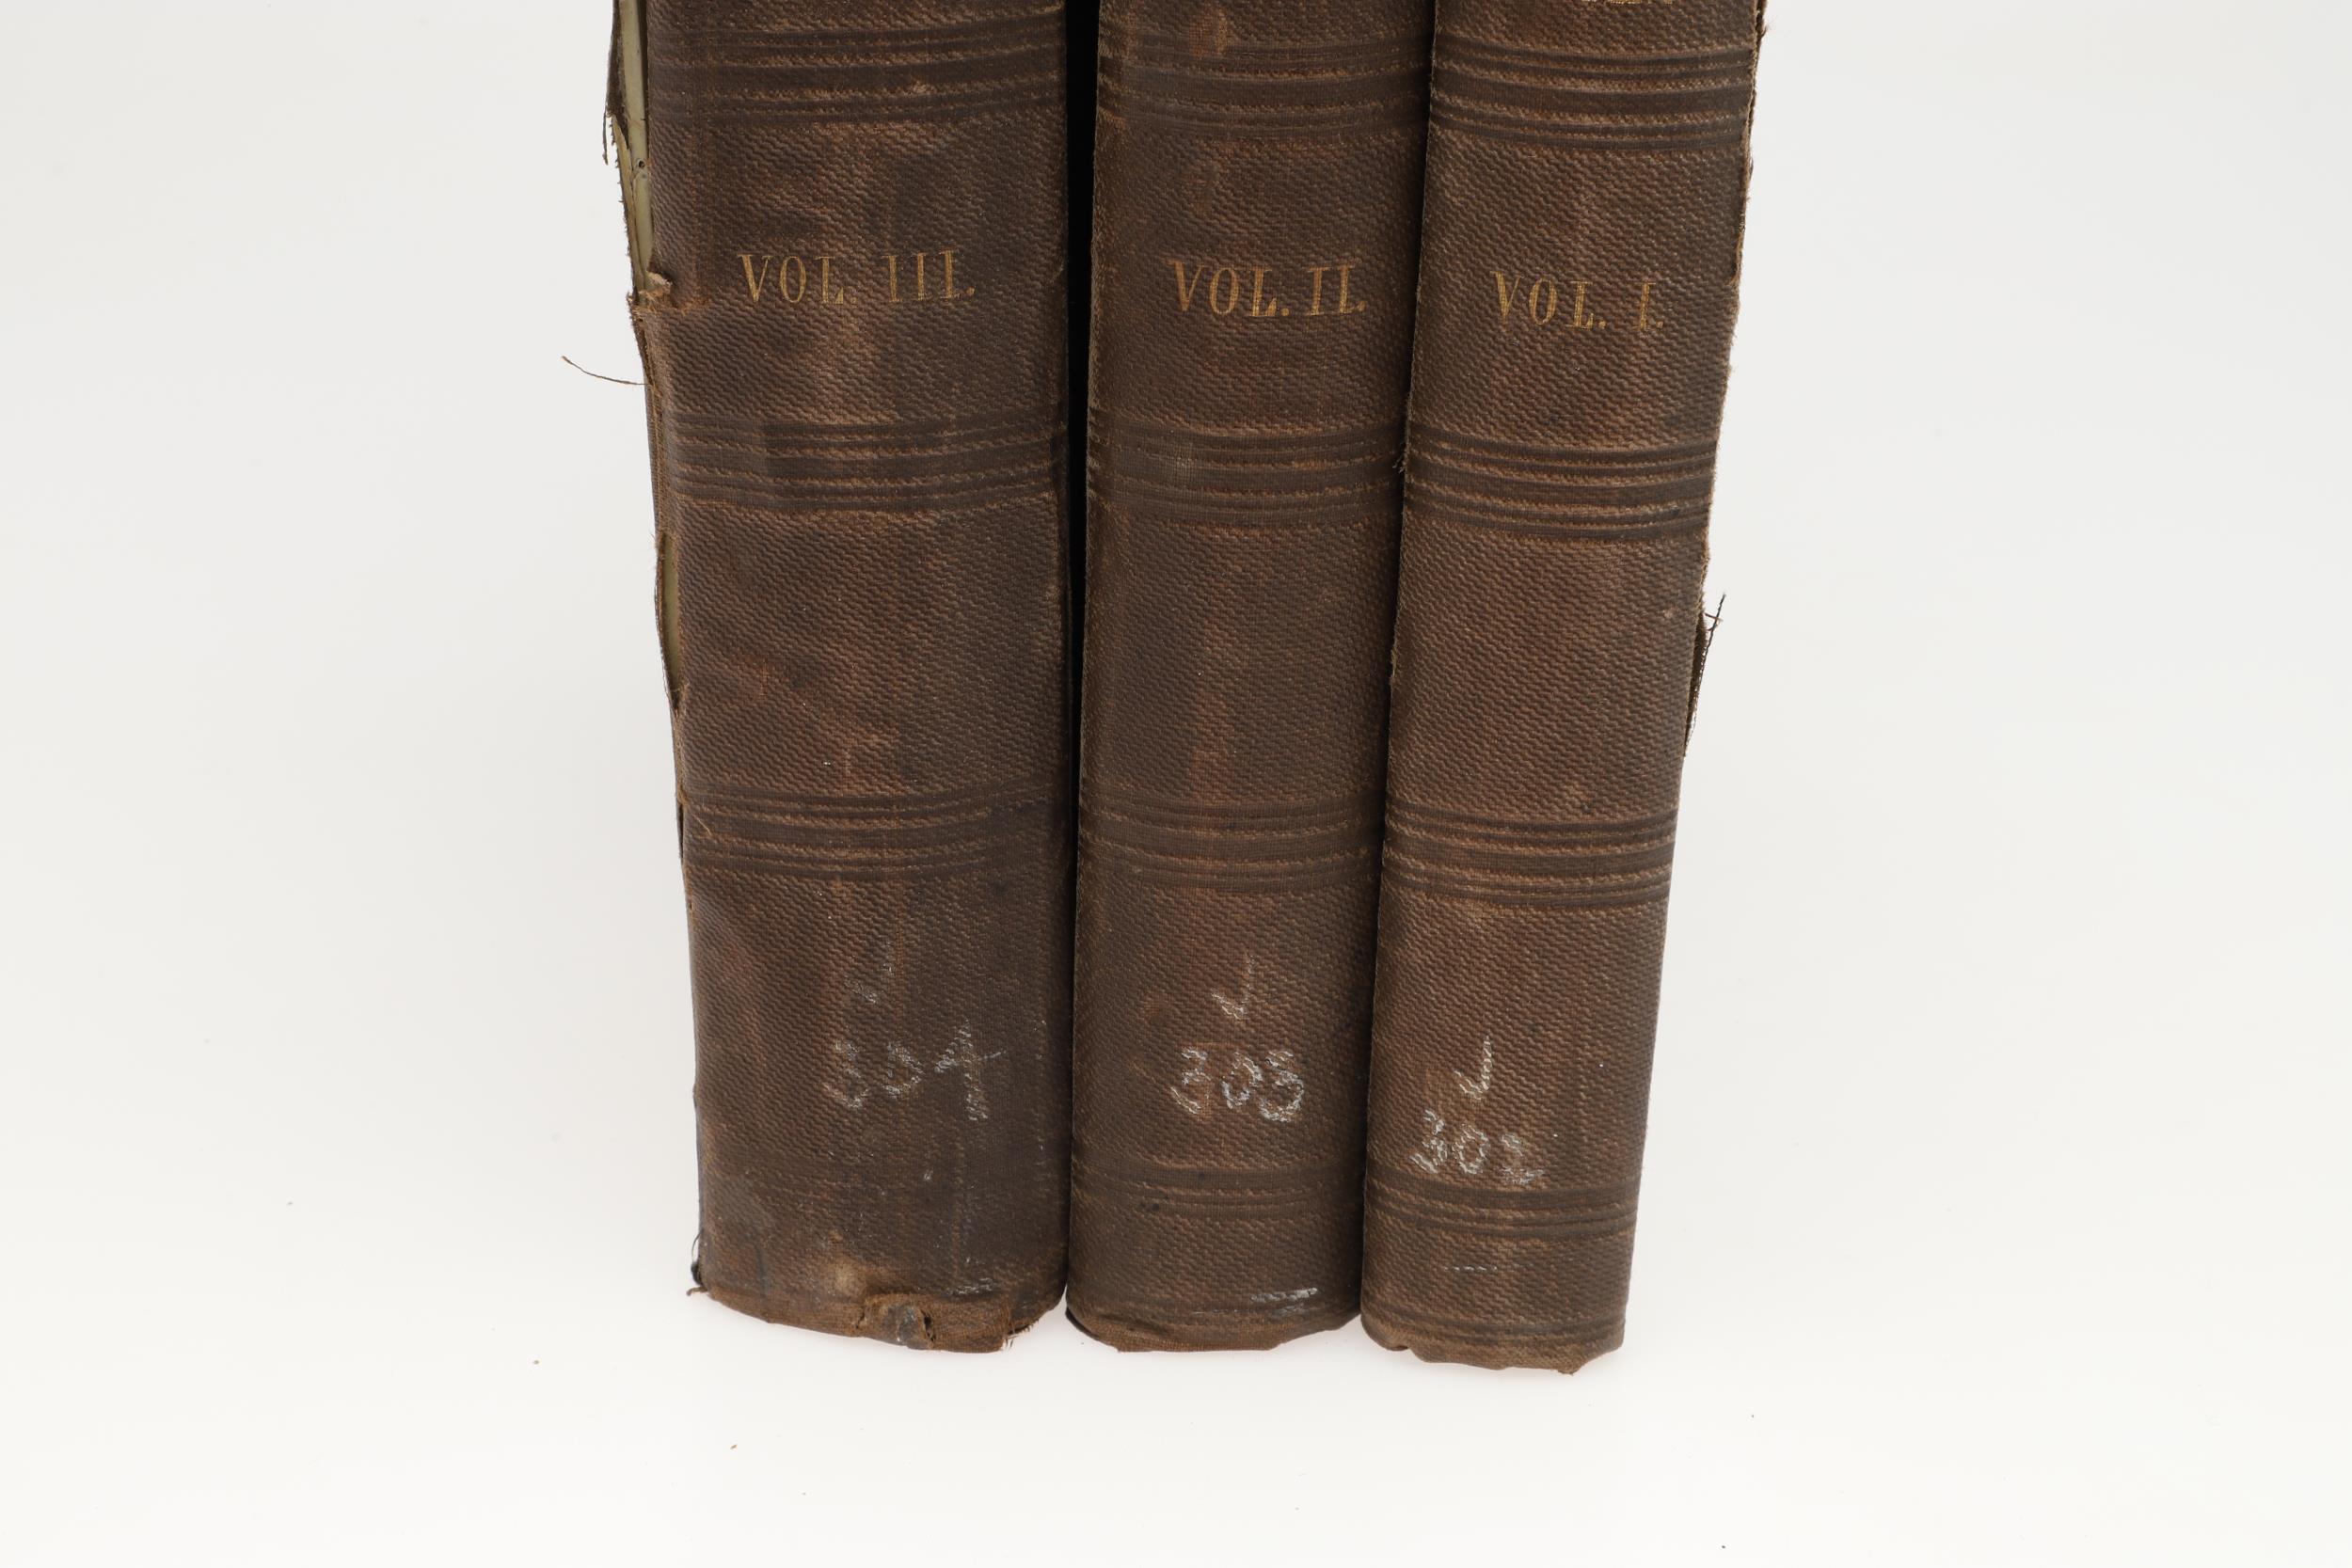 ANNALS OF THE COINAGE OF GREAT BRITAIN, 1840, THE REV. ROGERS RUDING. 3 VOLUMES. - Image 3 of 10